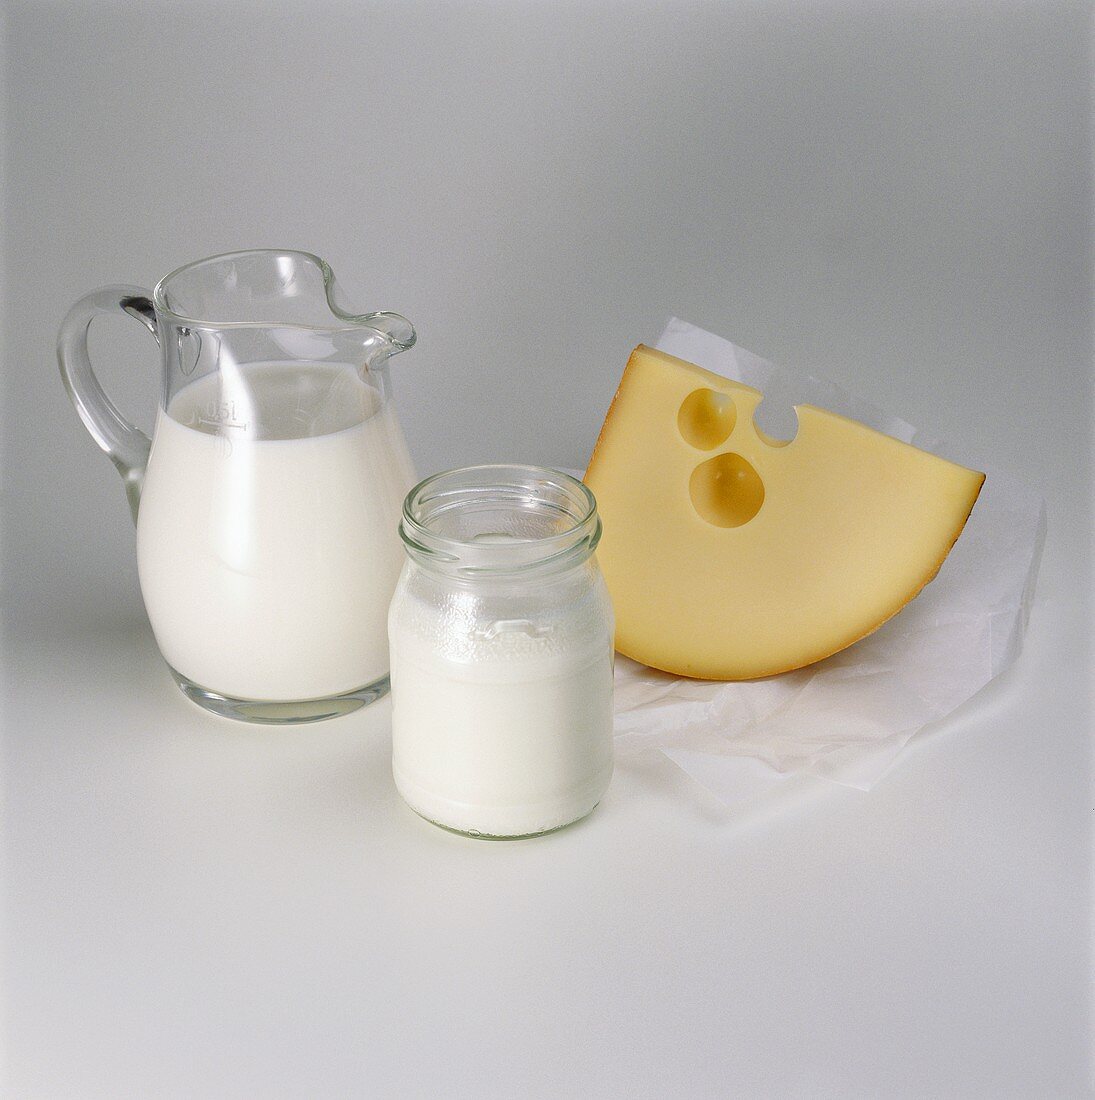 Cream in glass jug, yoghurt in glass & a piece of cheese